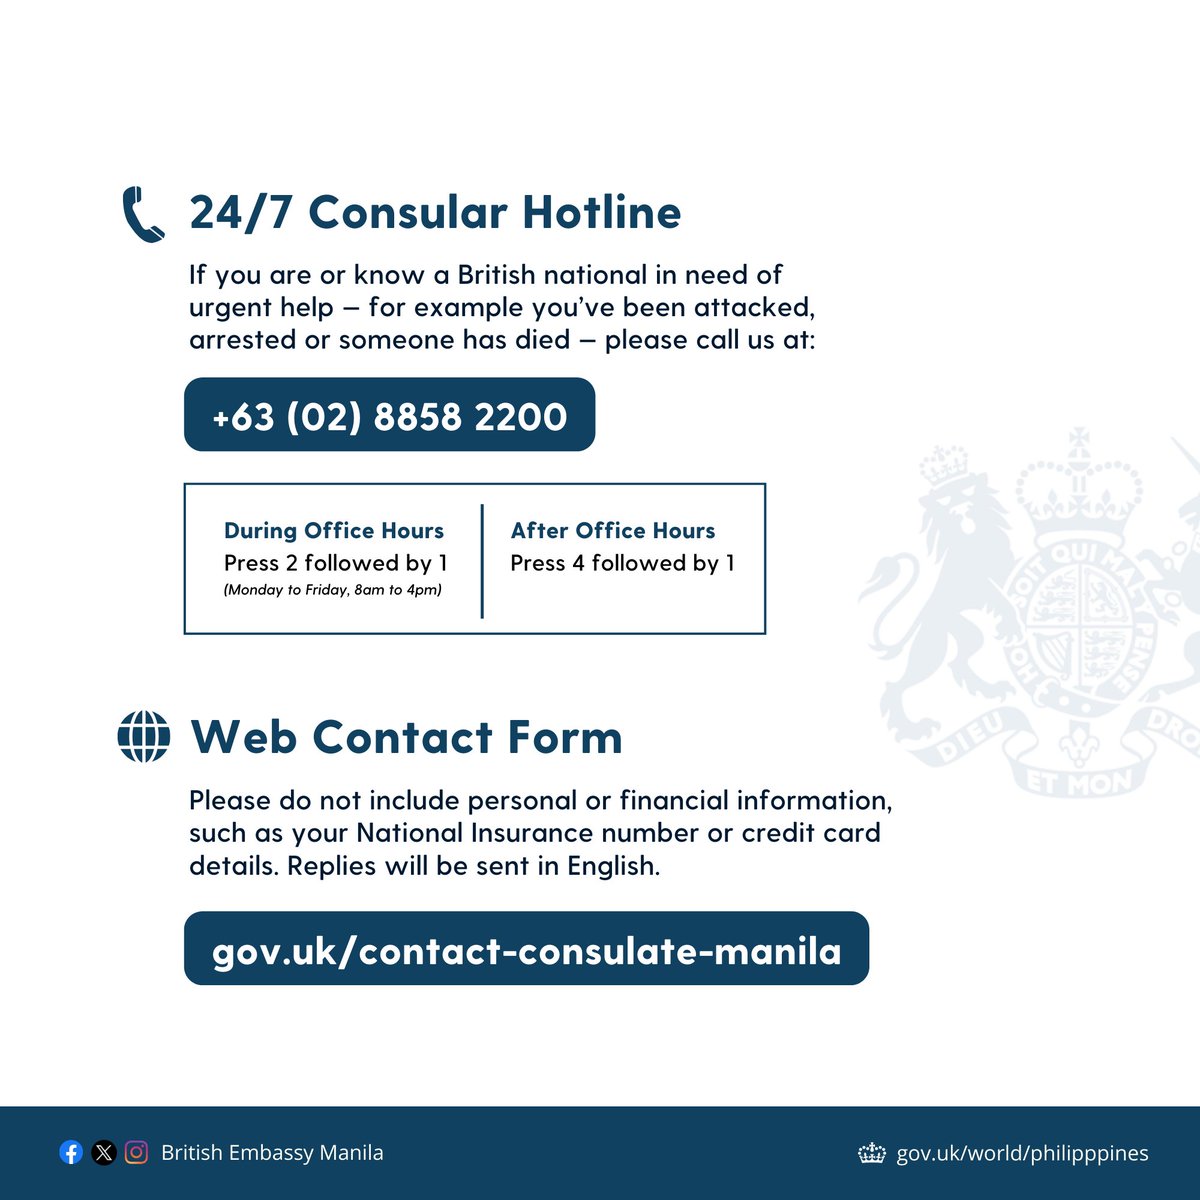 #DidUKnow that you can contact us for consular assistance 24/7 📞 If you are or know a British national in need of urgent help, please call +(63) 02-8858-2200 If your enquiry is less urgent, you can contact us via our online web form ➡️ gov.uk/contact-consul…